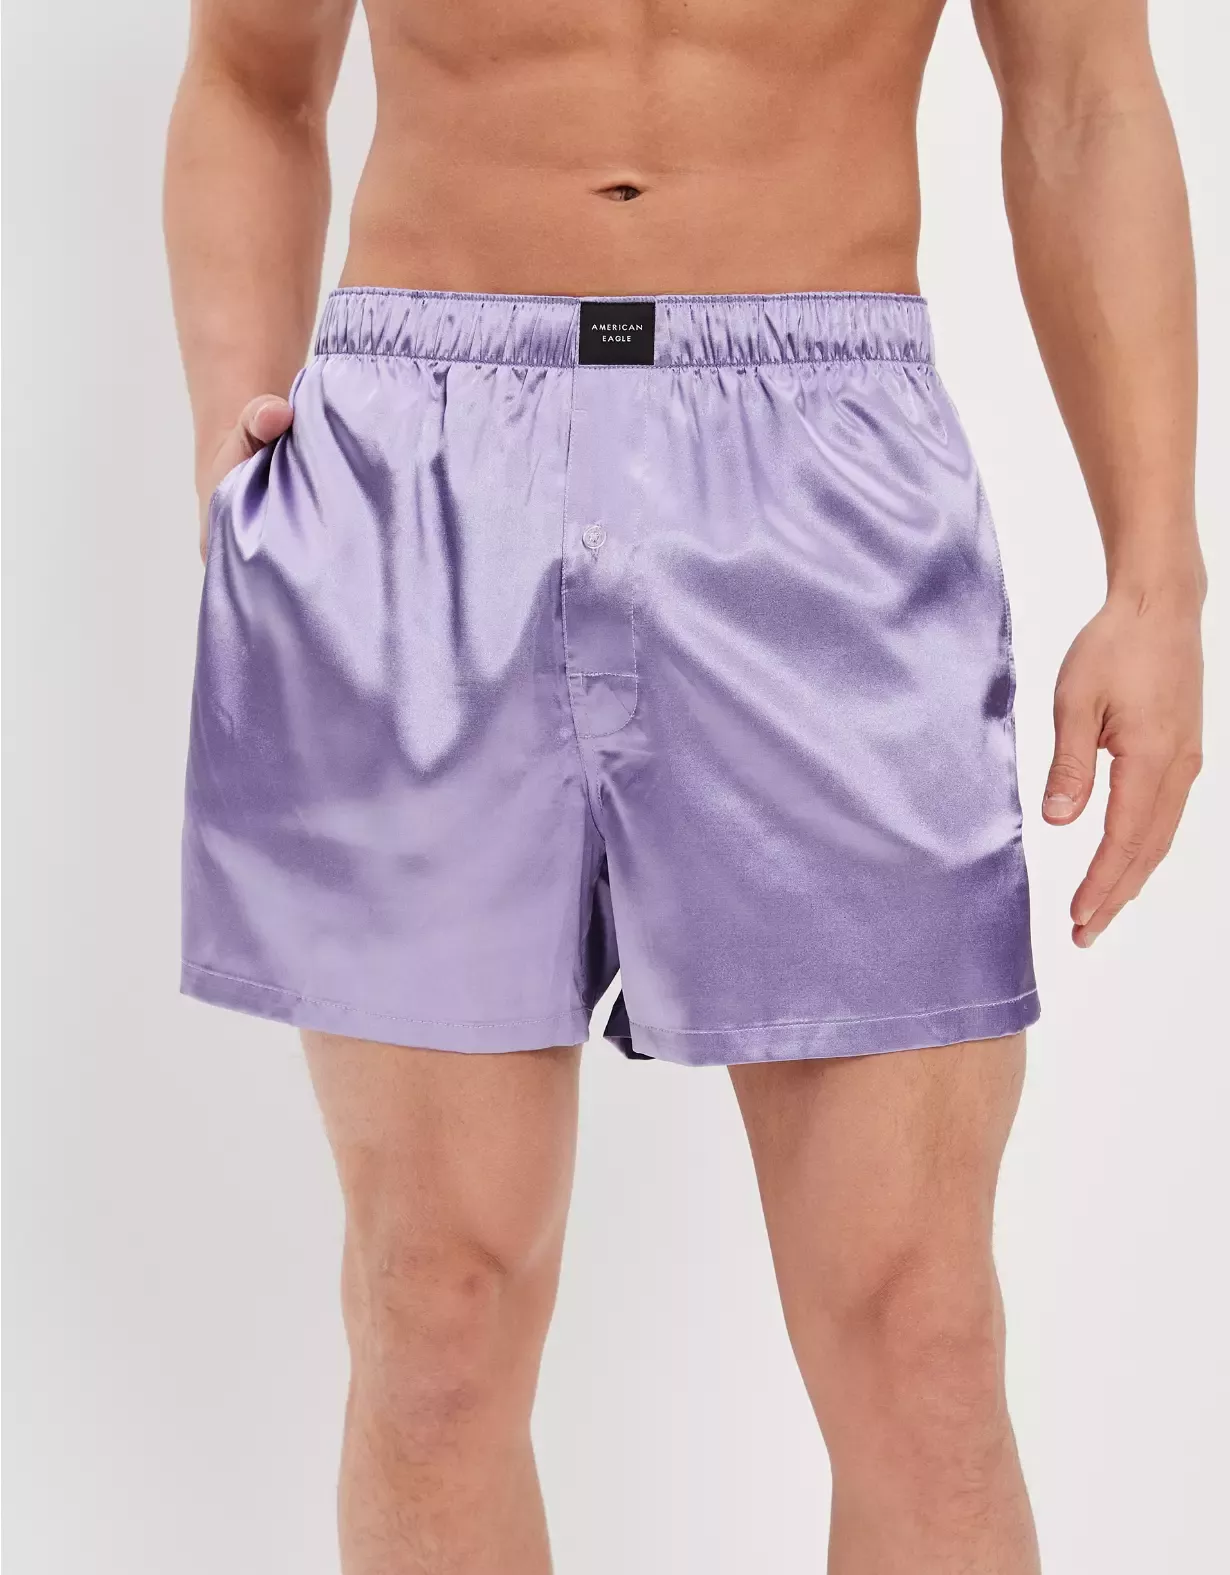 SOFT LOUNGE BOXER $34 curated on LTK